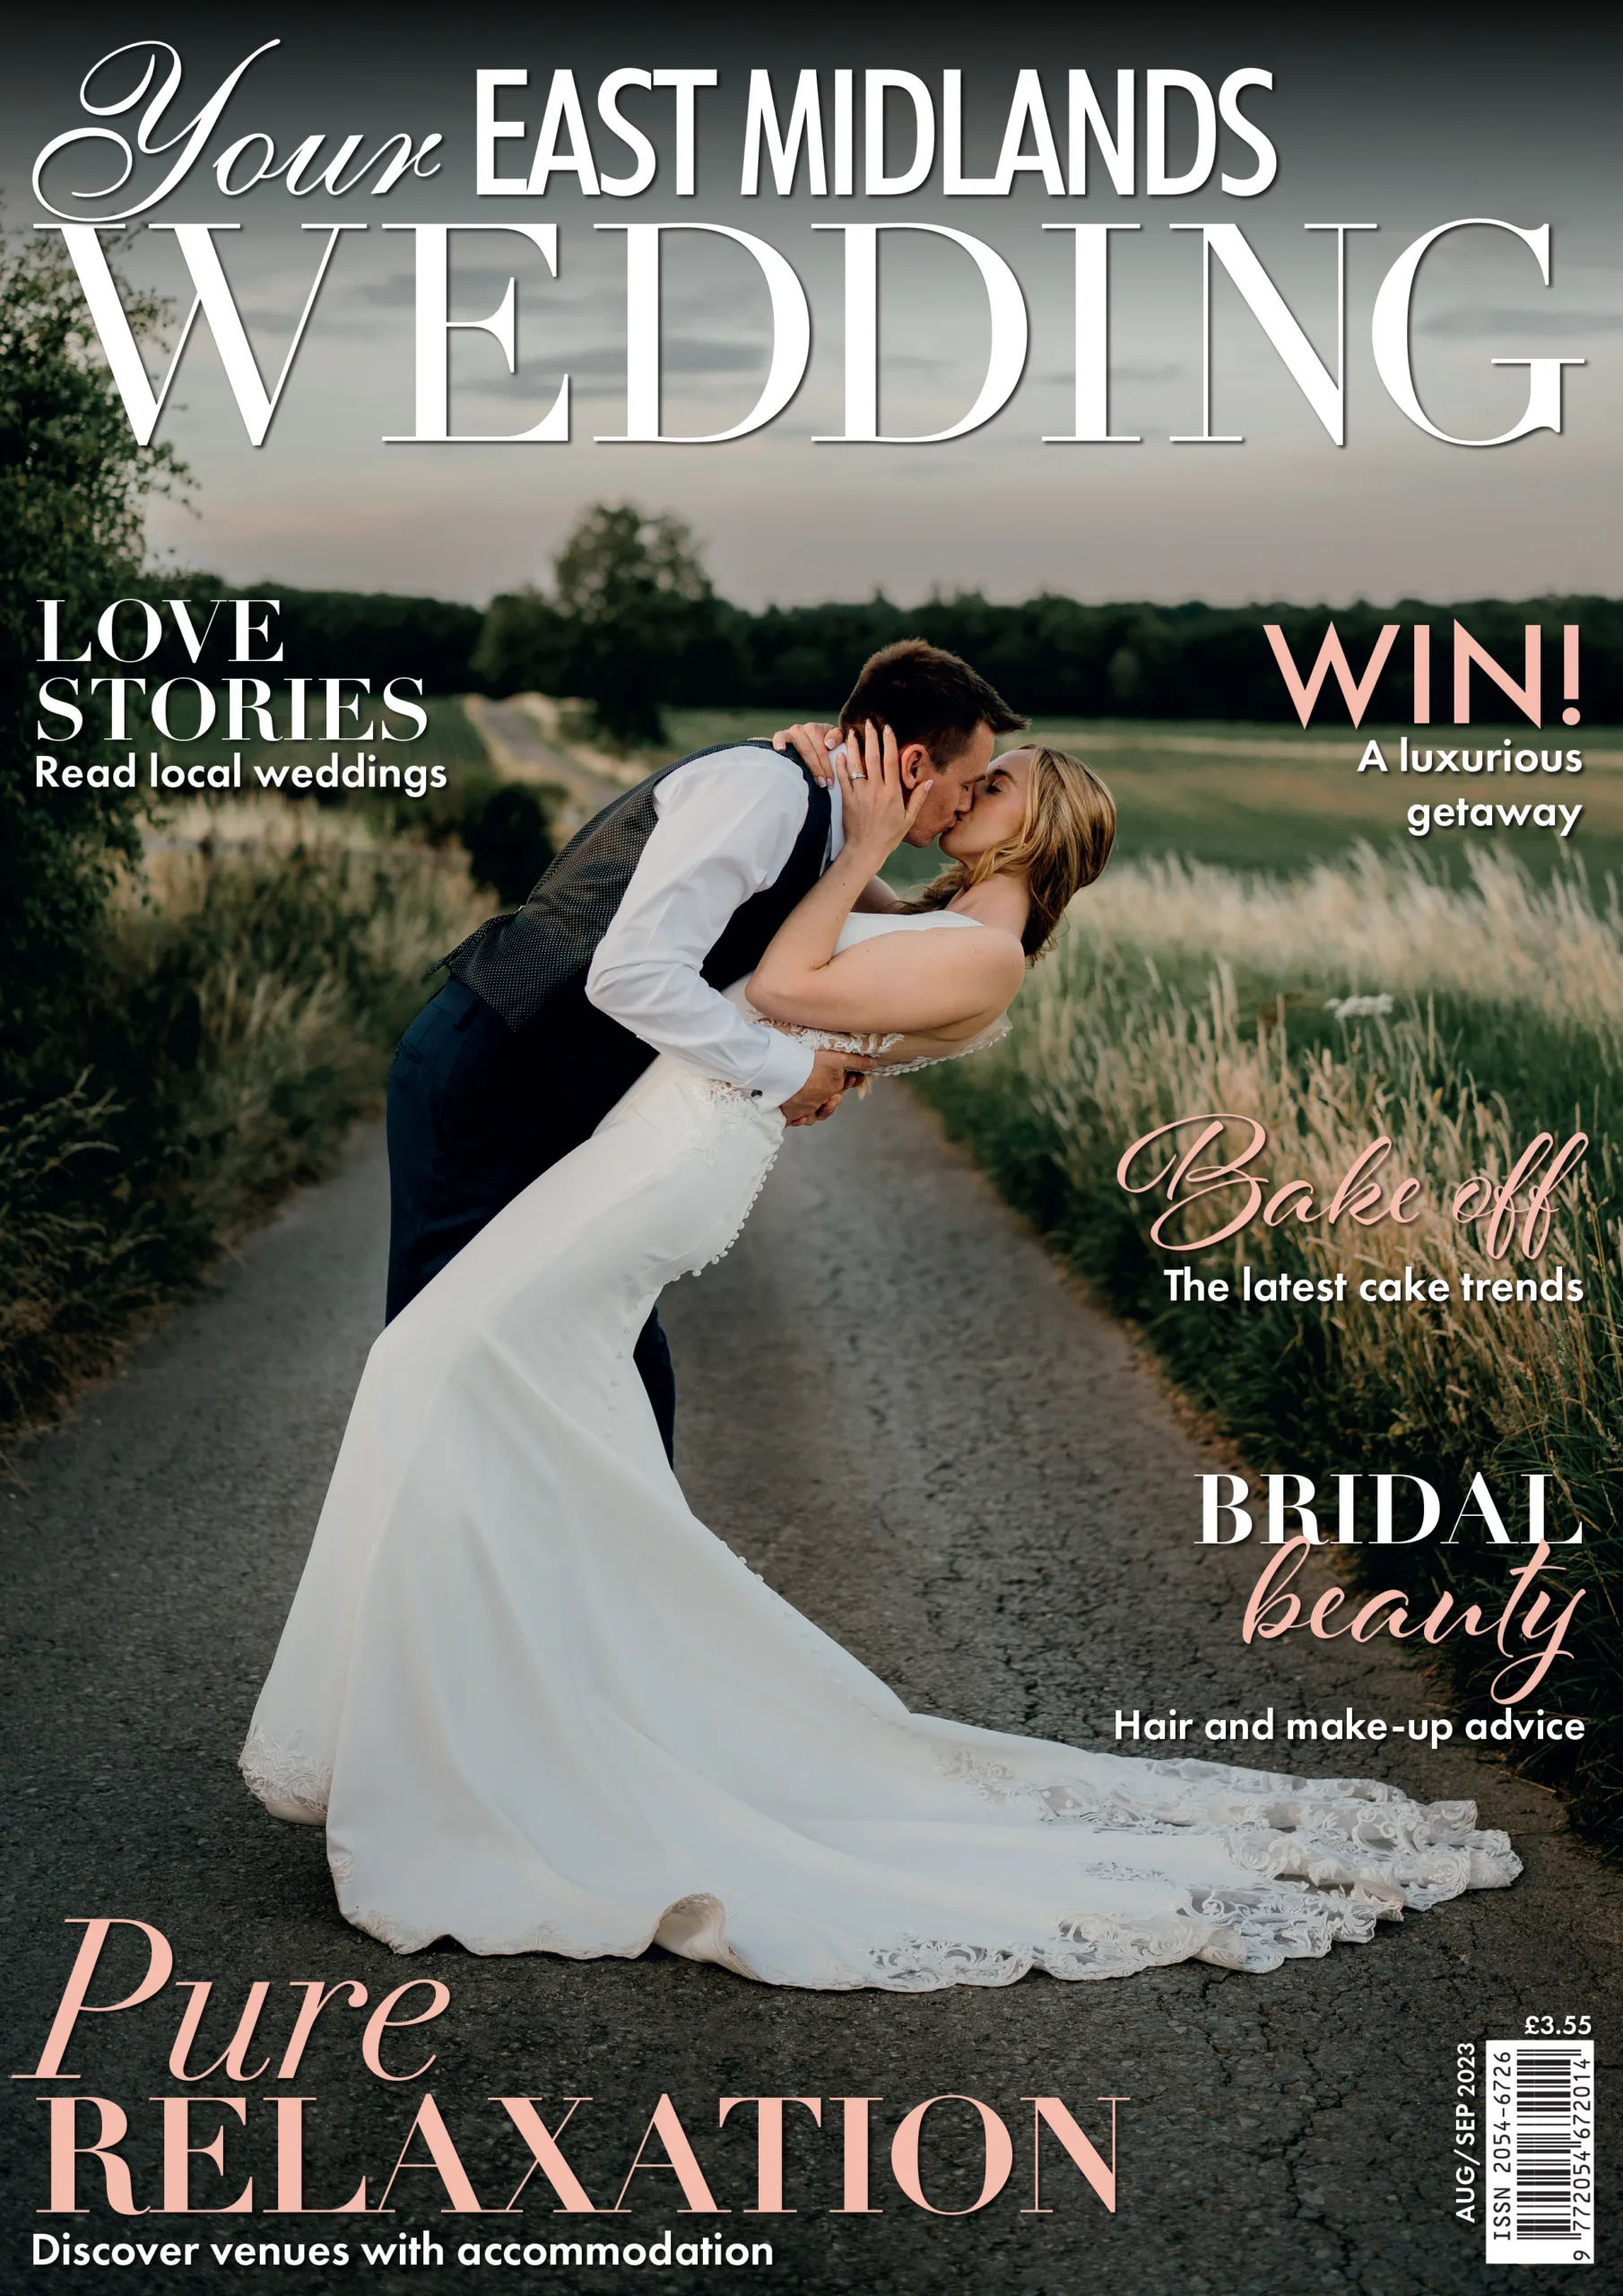 A man and woman sharing a passionate kiss gracing the cover of Your East Midlands Wedding magazine, captured by a talented wedding photographer from the East Midlands.